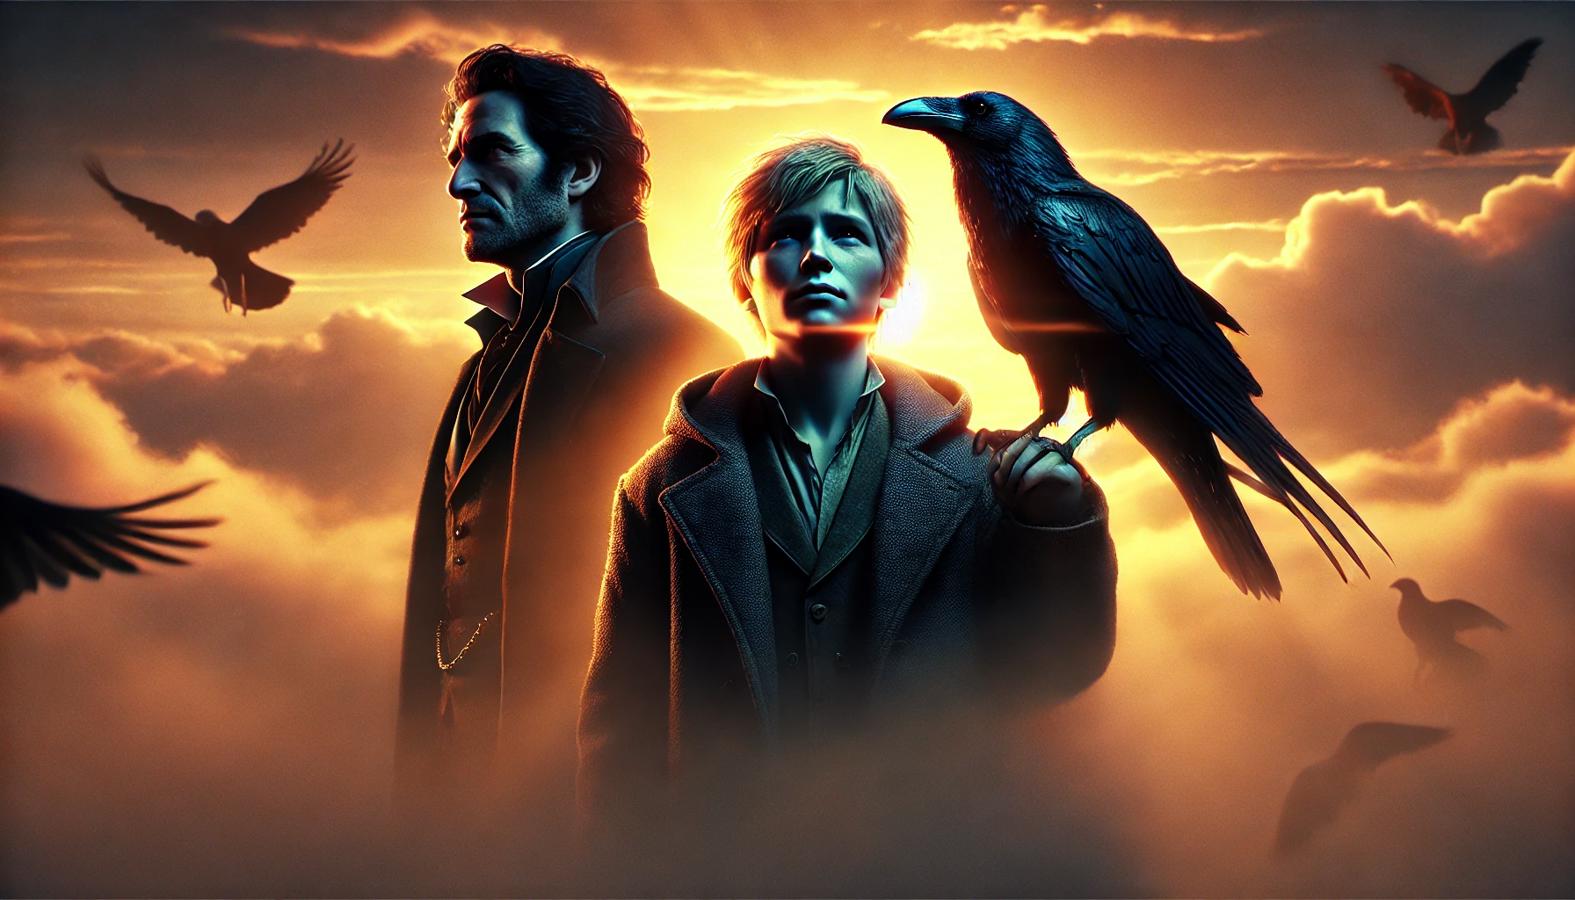 Edgar, Alaric, and the raven standing together at dawn, the first light of dawn breaking through the clouds.